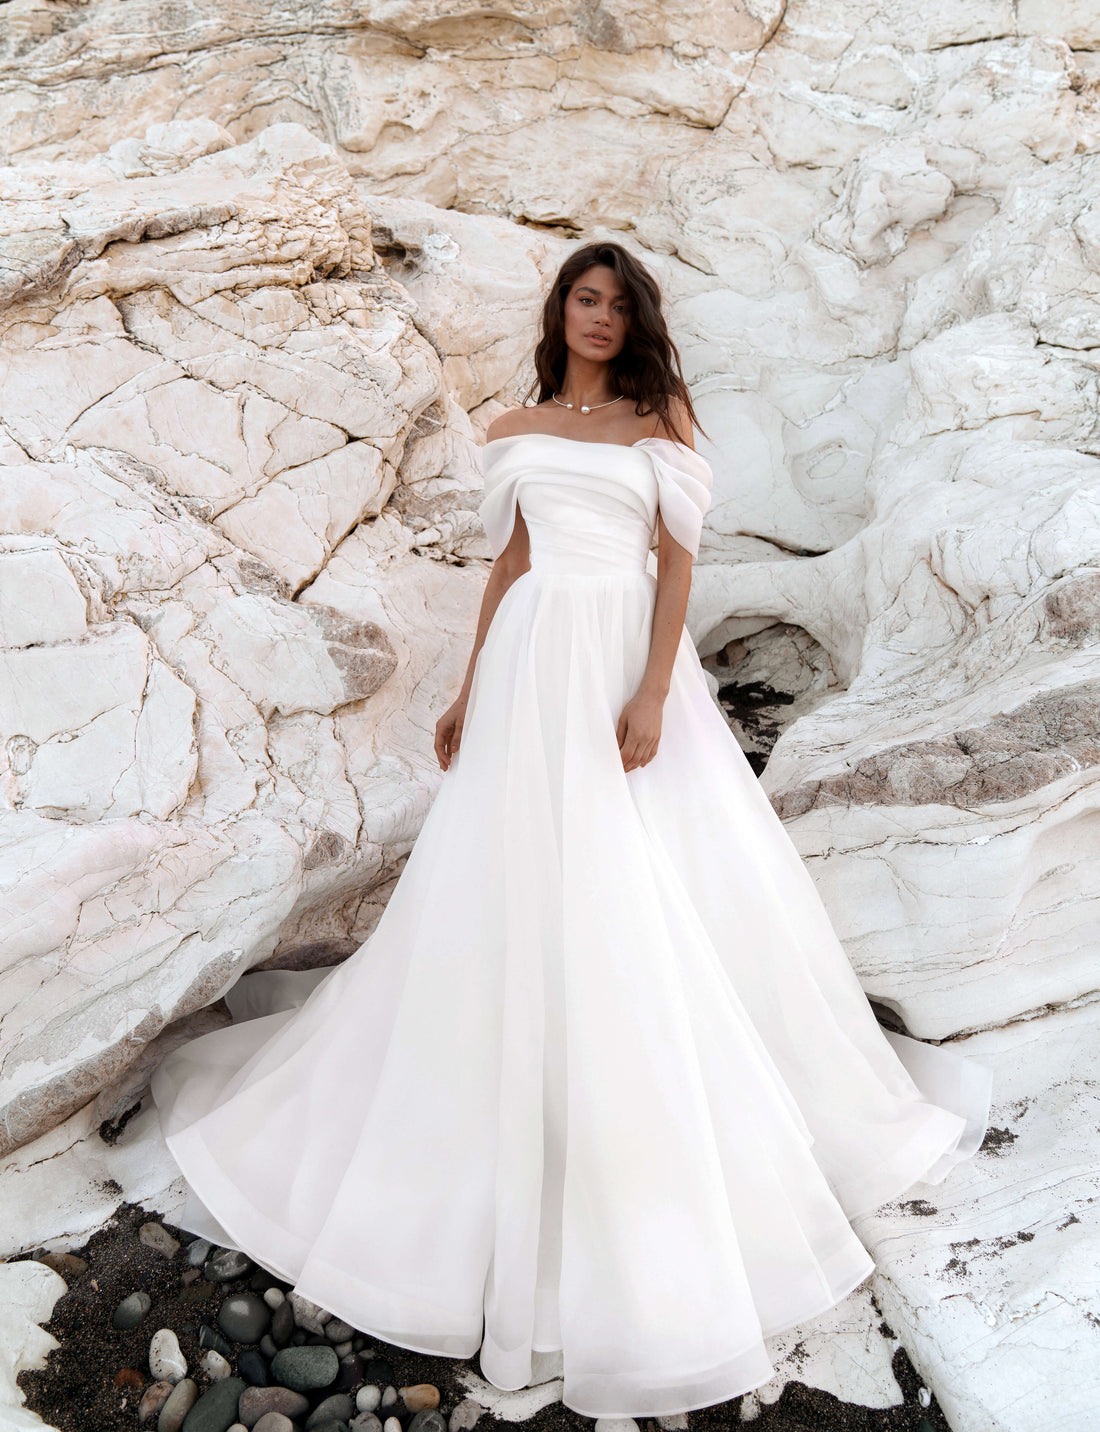  Discover the New Collection of Breathtaking Bridal Gowns "Sunset"